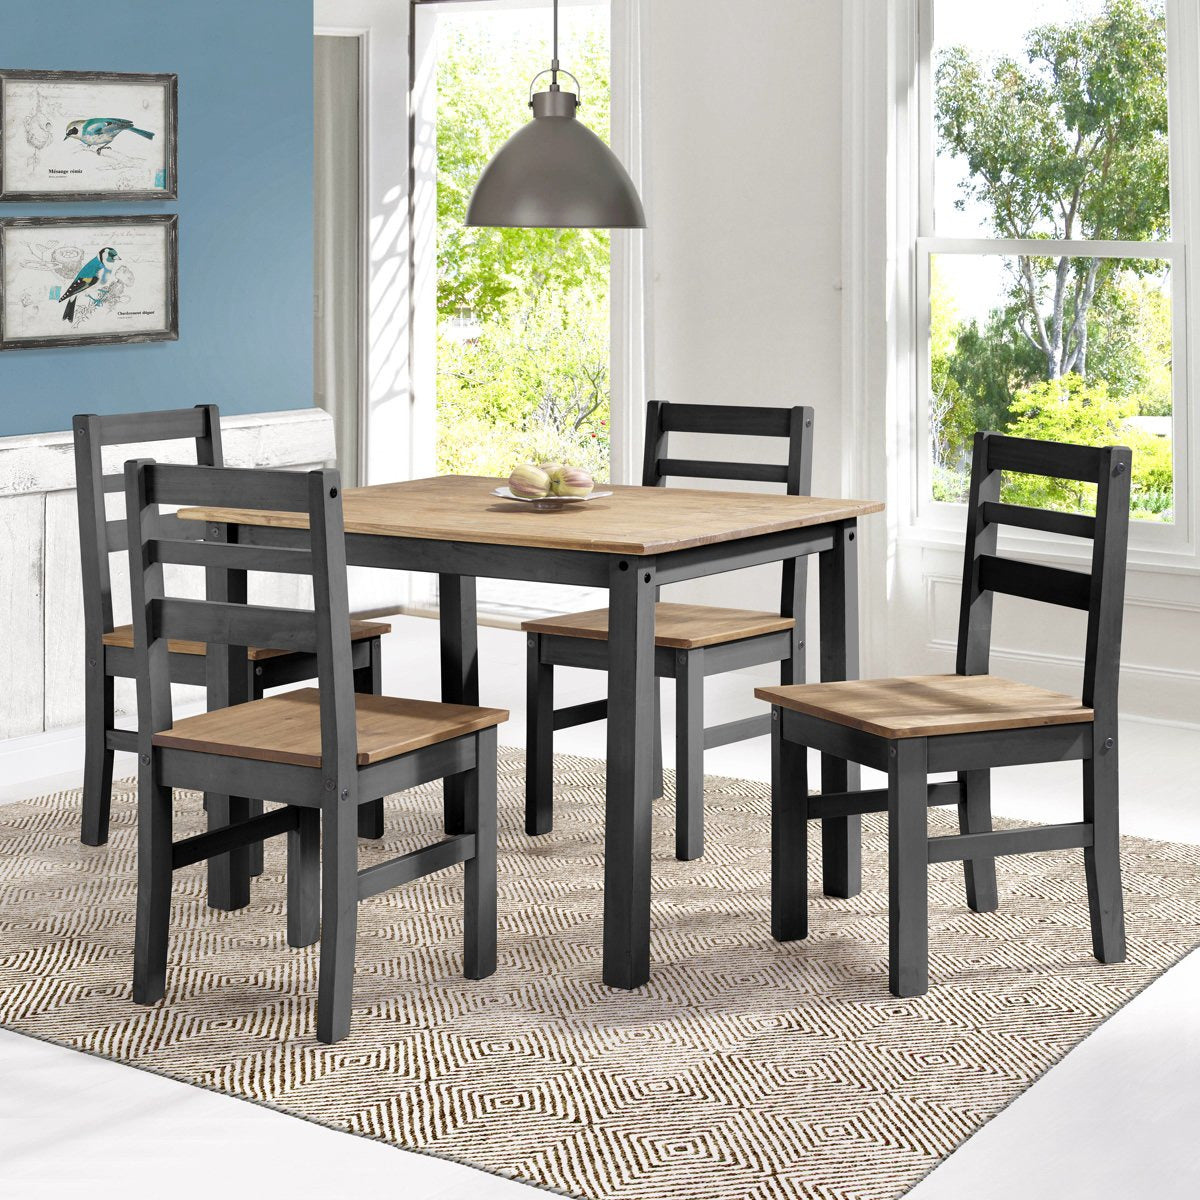 Manhattan Comfort Maiden 5-Piece Solid Wood Dining Set with 1 Table and 4 Chairs in Black Wash-Minimal & Modern